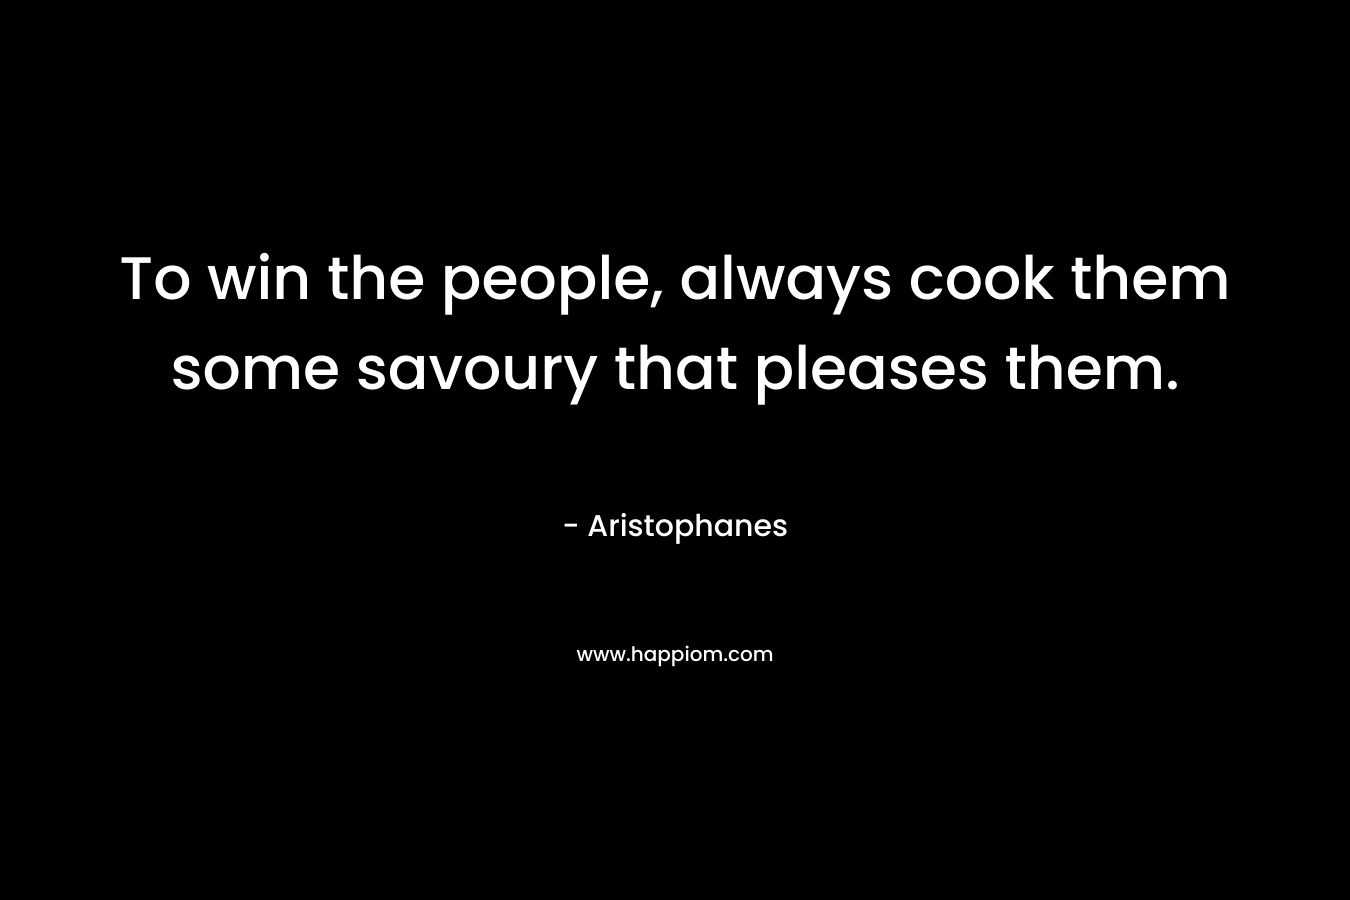 To win the people, always cook them some savoury that pleases them.